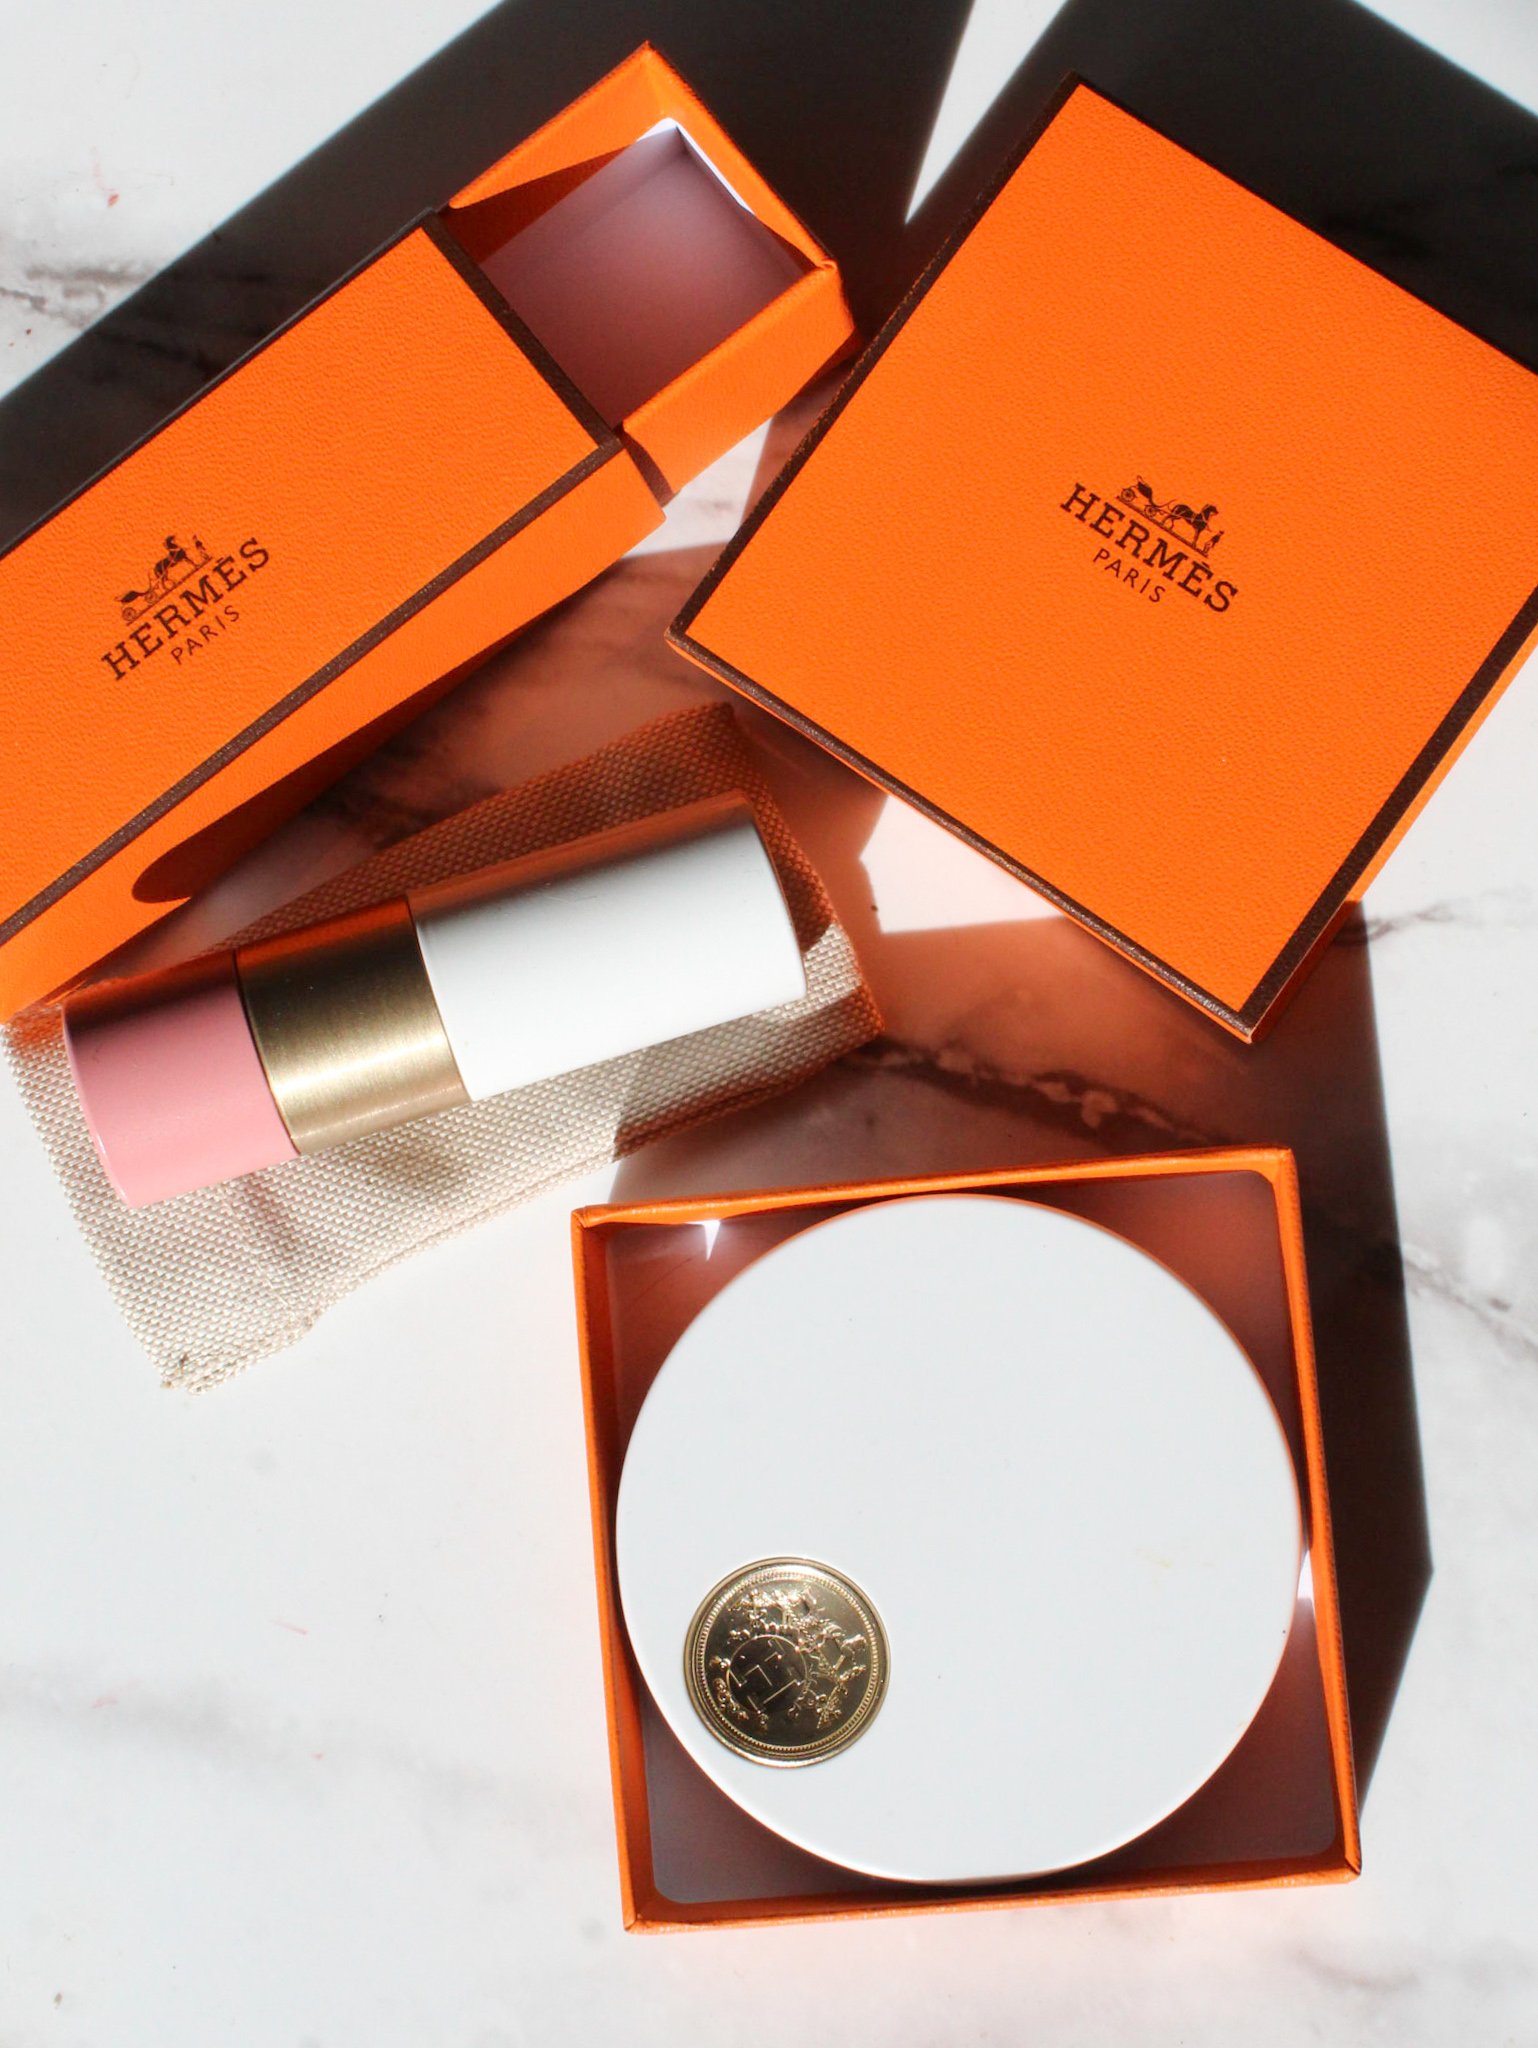 Rose Hermes Silky Blush Powder + Rosy Lip Enhancer Review - The Beauty Look  Book